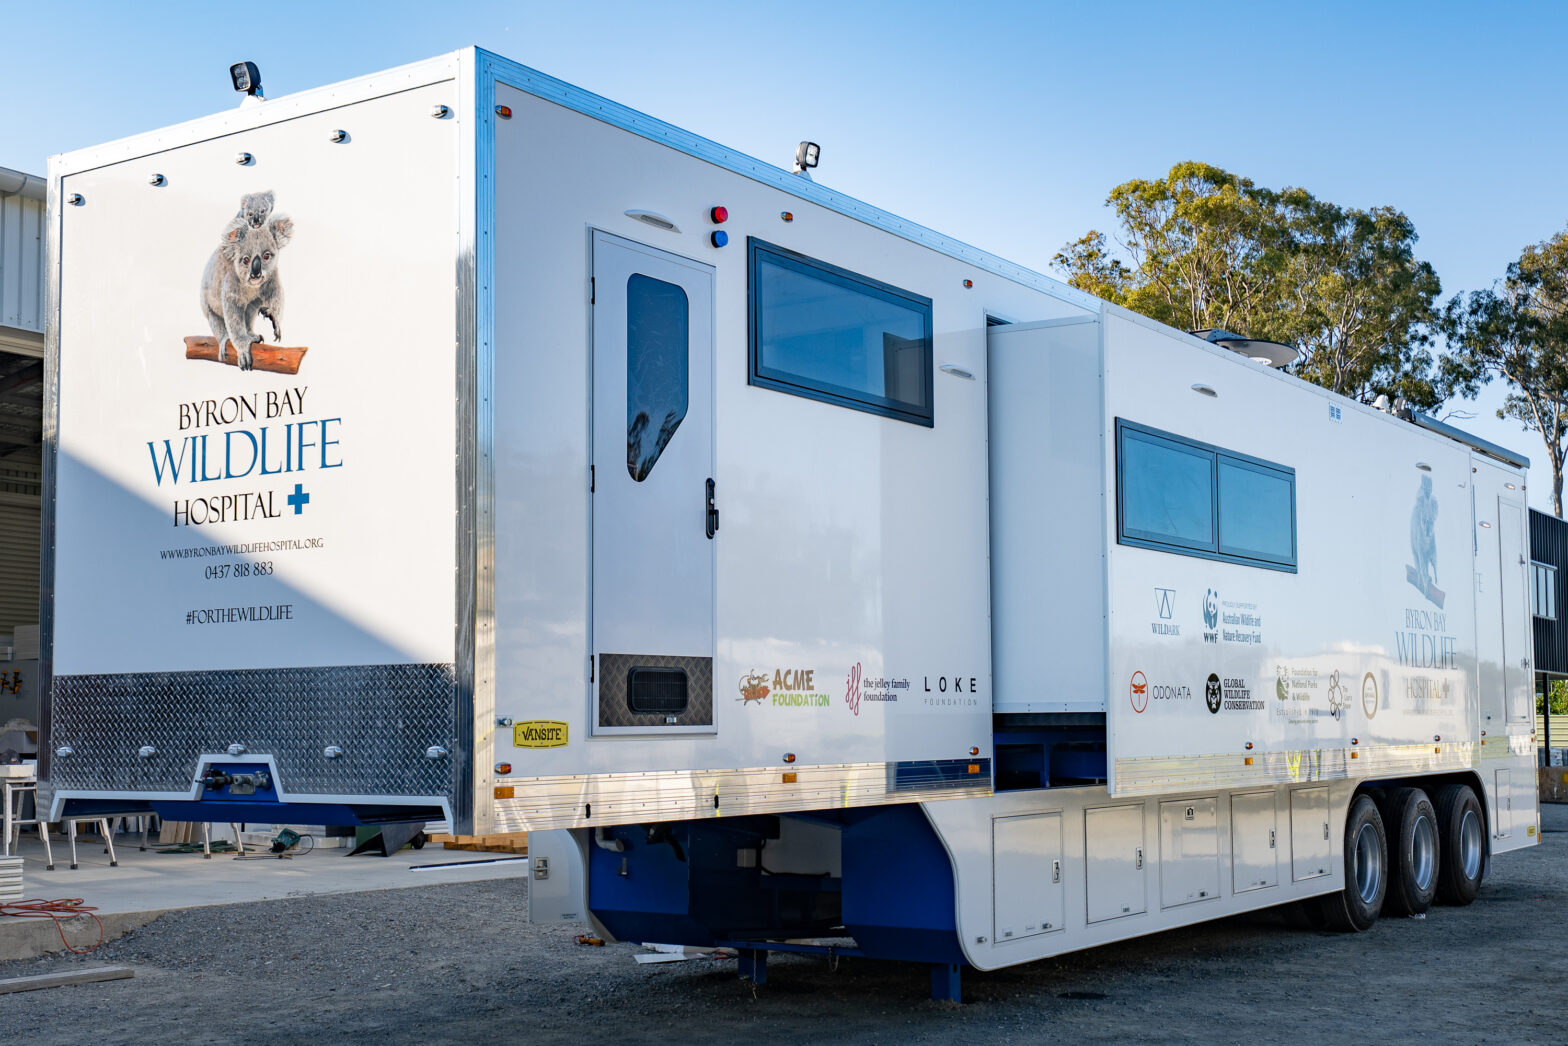 Byron Bay Mobile Wildlife Hospital designed and constructed by Vansite.